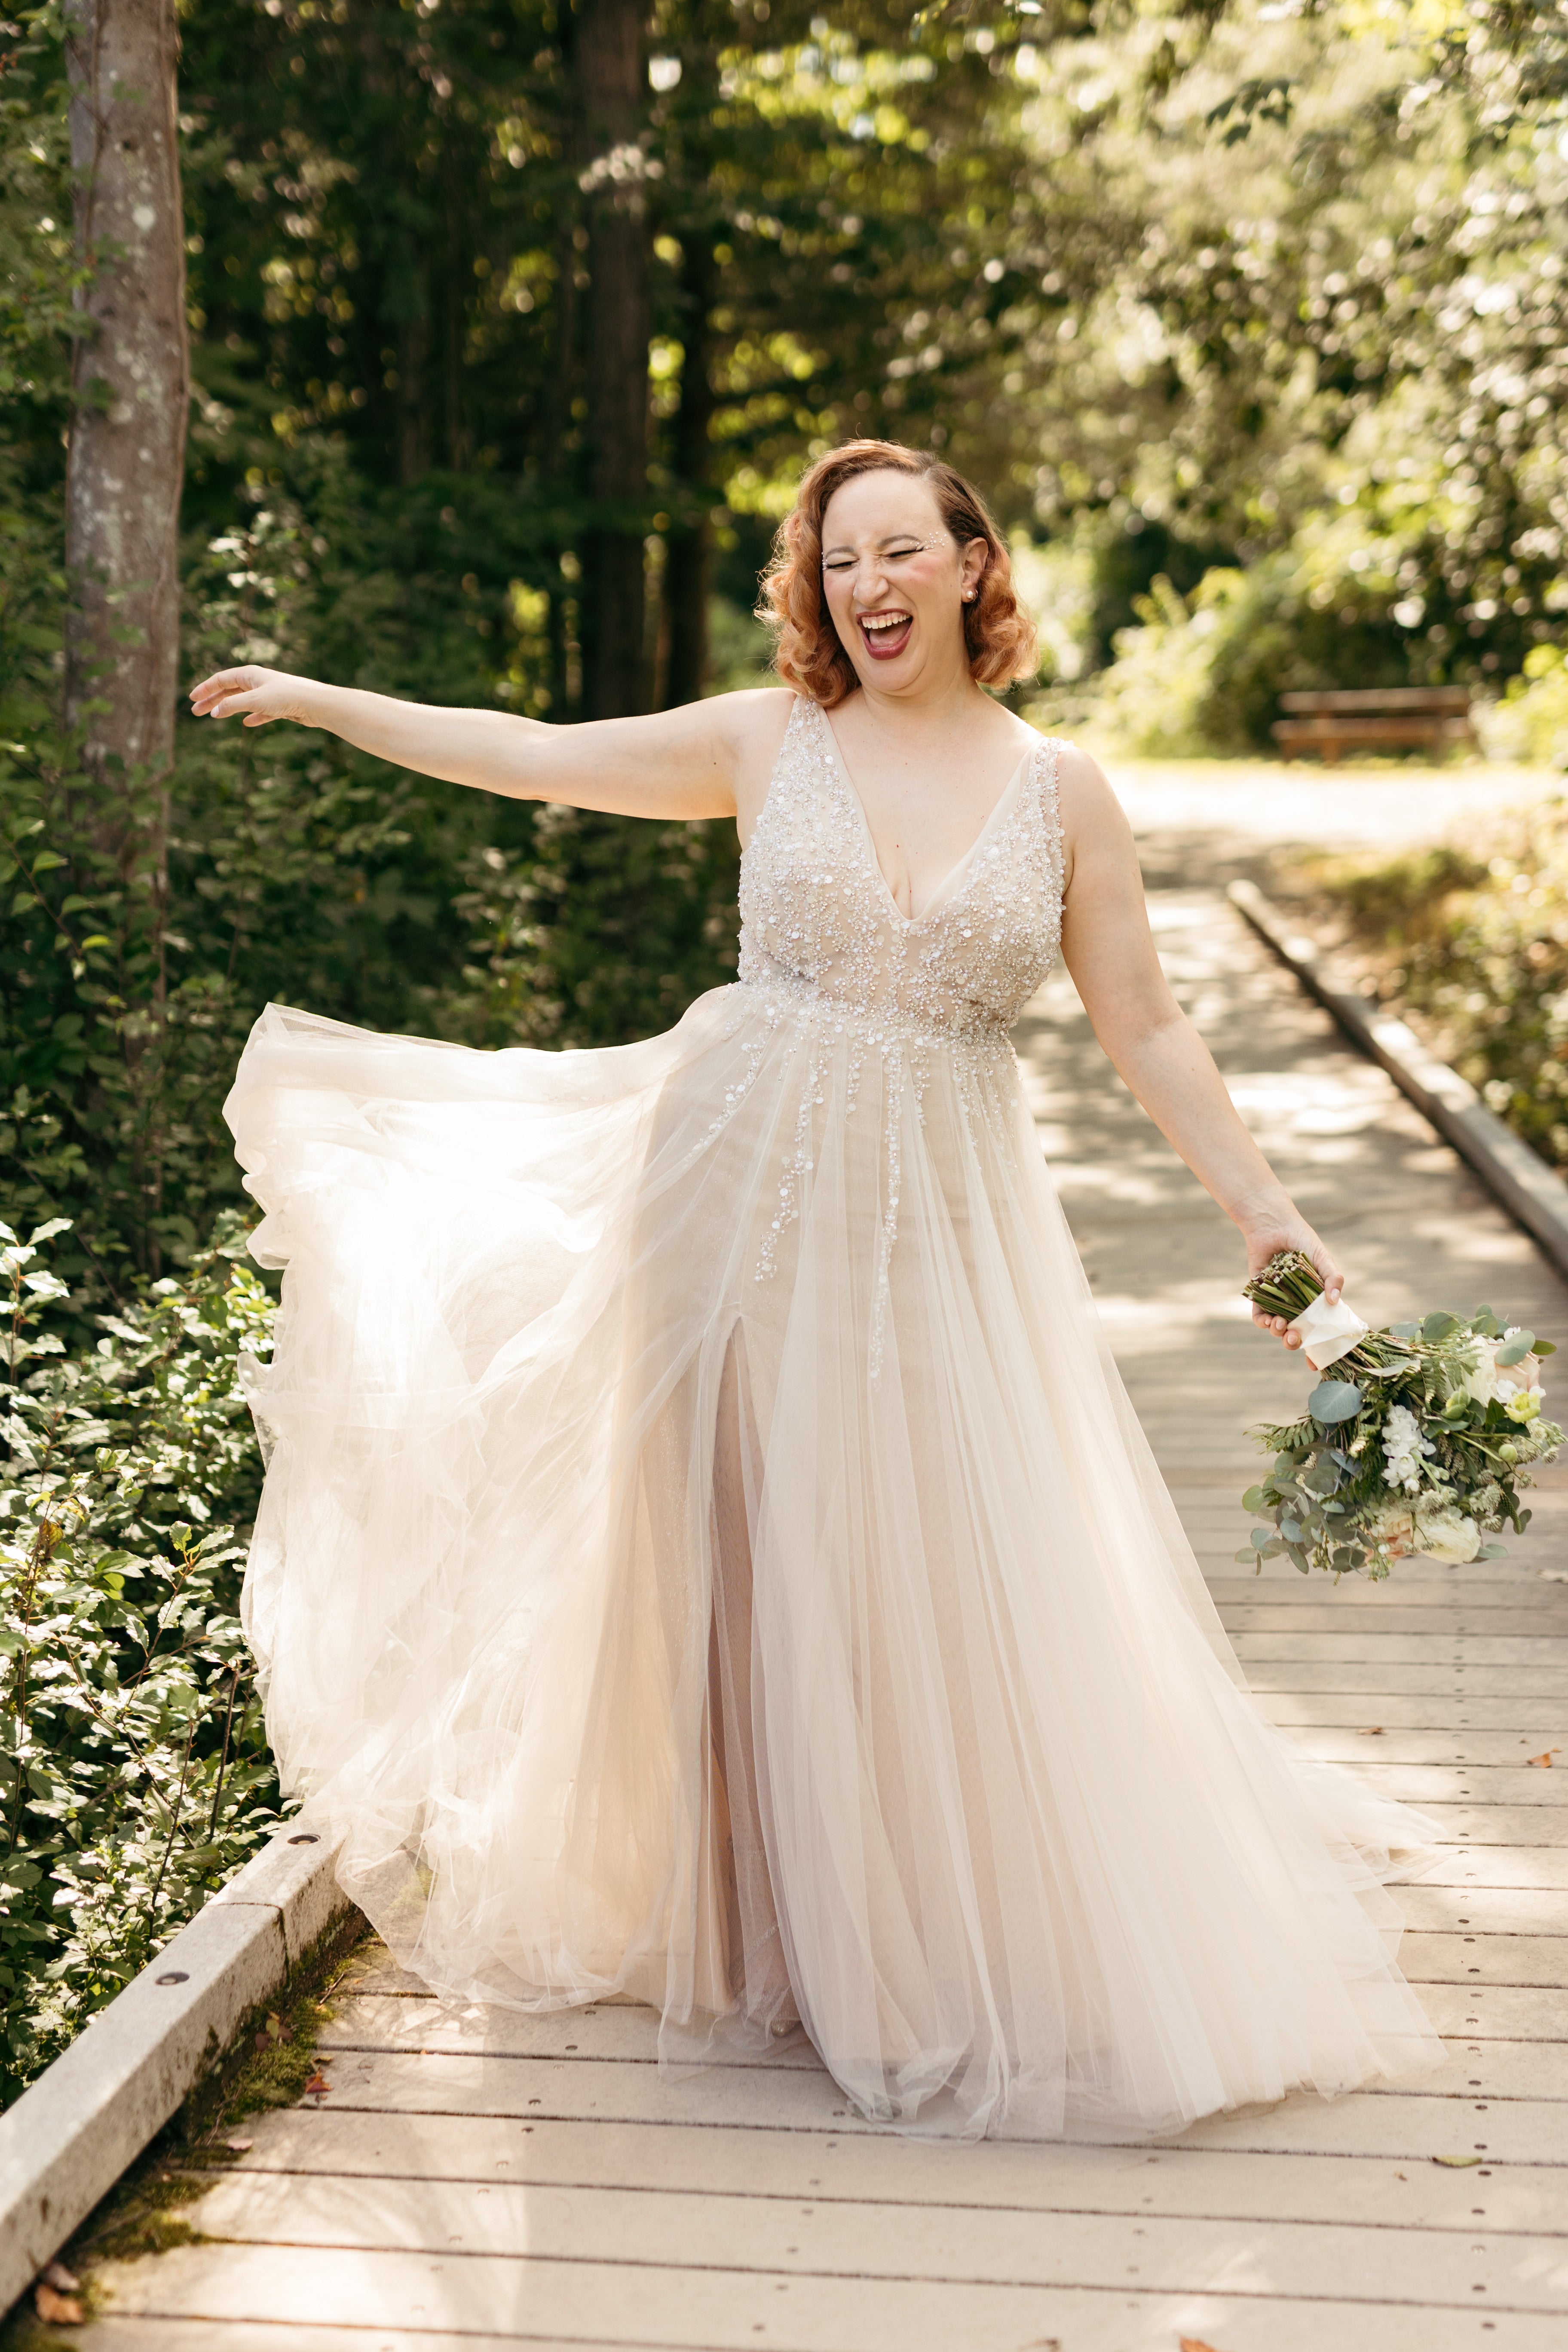 Walk the Aisle In Style- Why I Want to Skip the Wedding Dress and